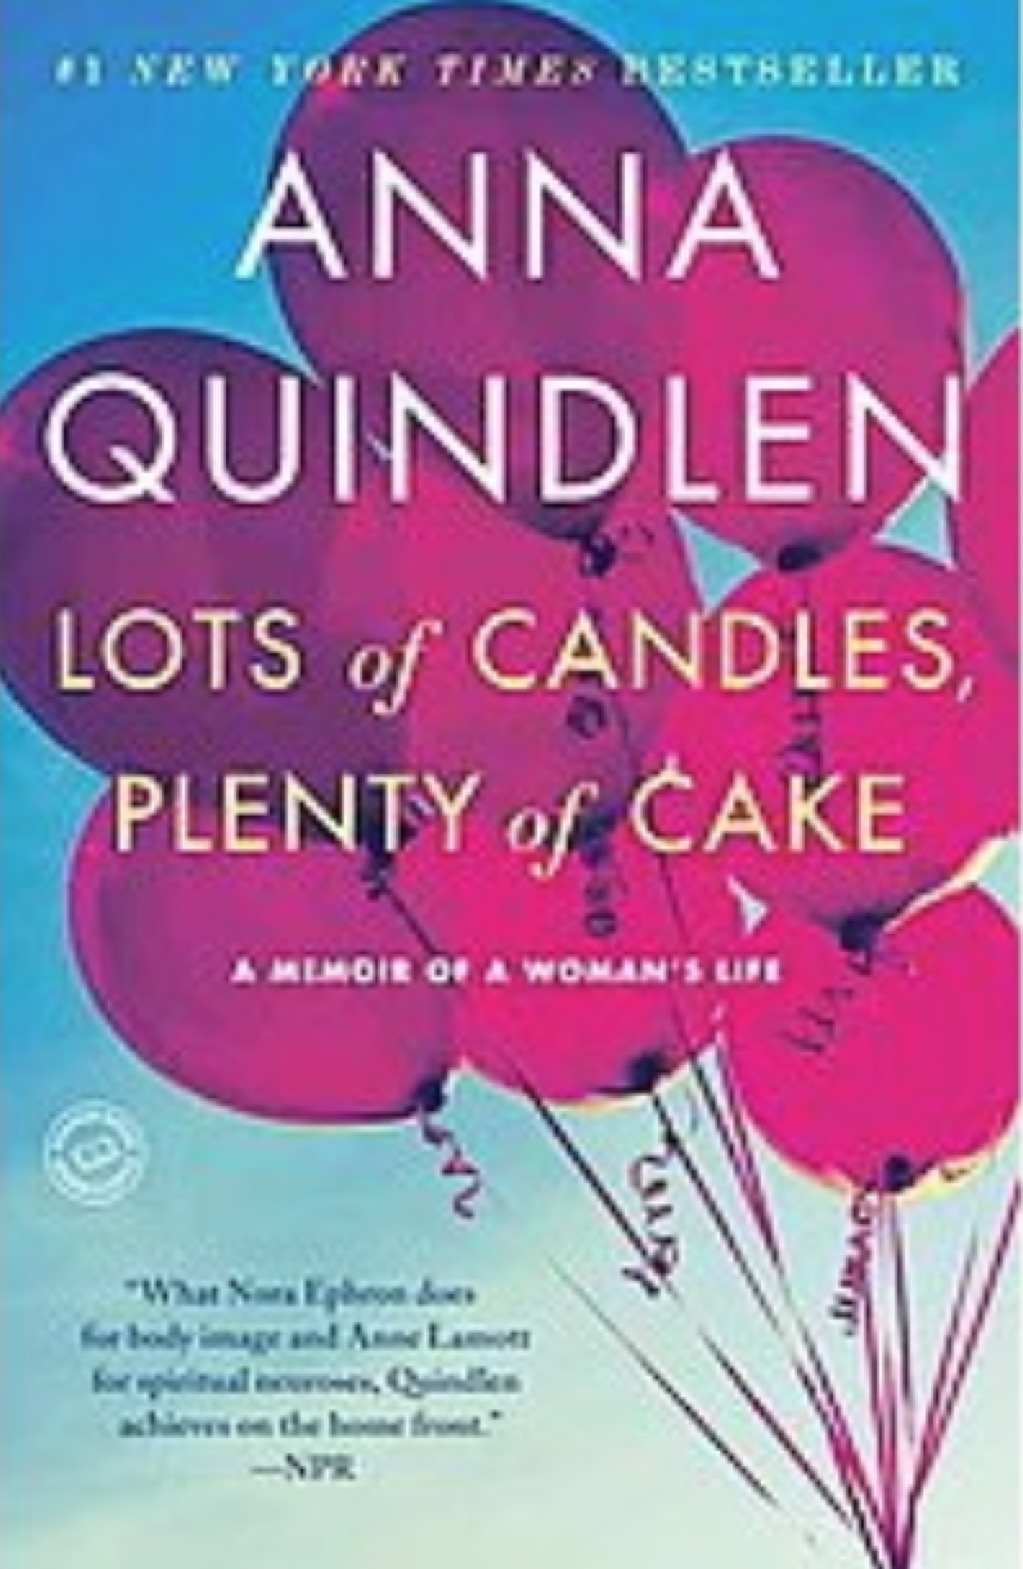 Lots of Candles, Plenty of Cake by Anna Quindlen 